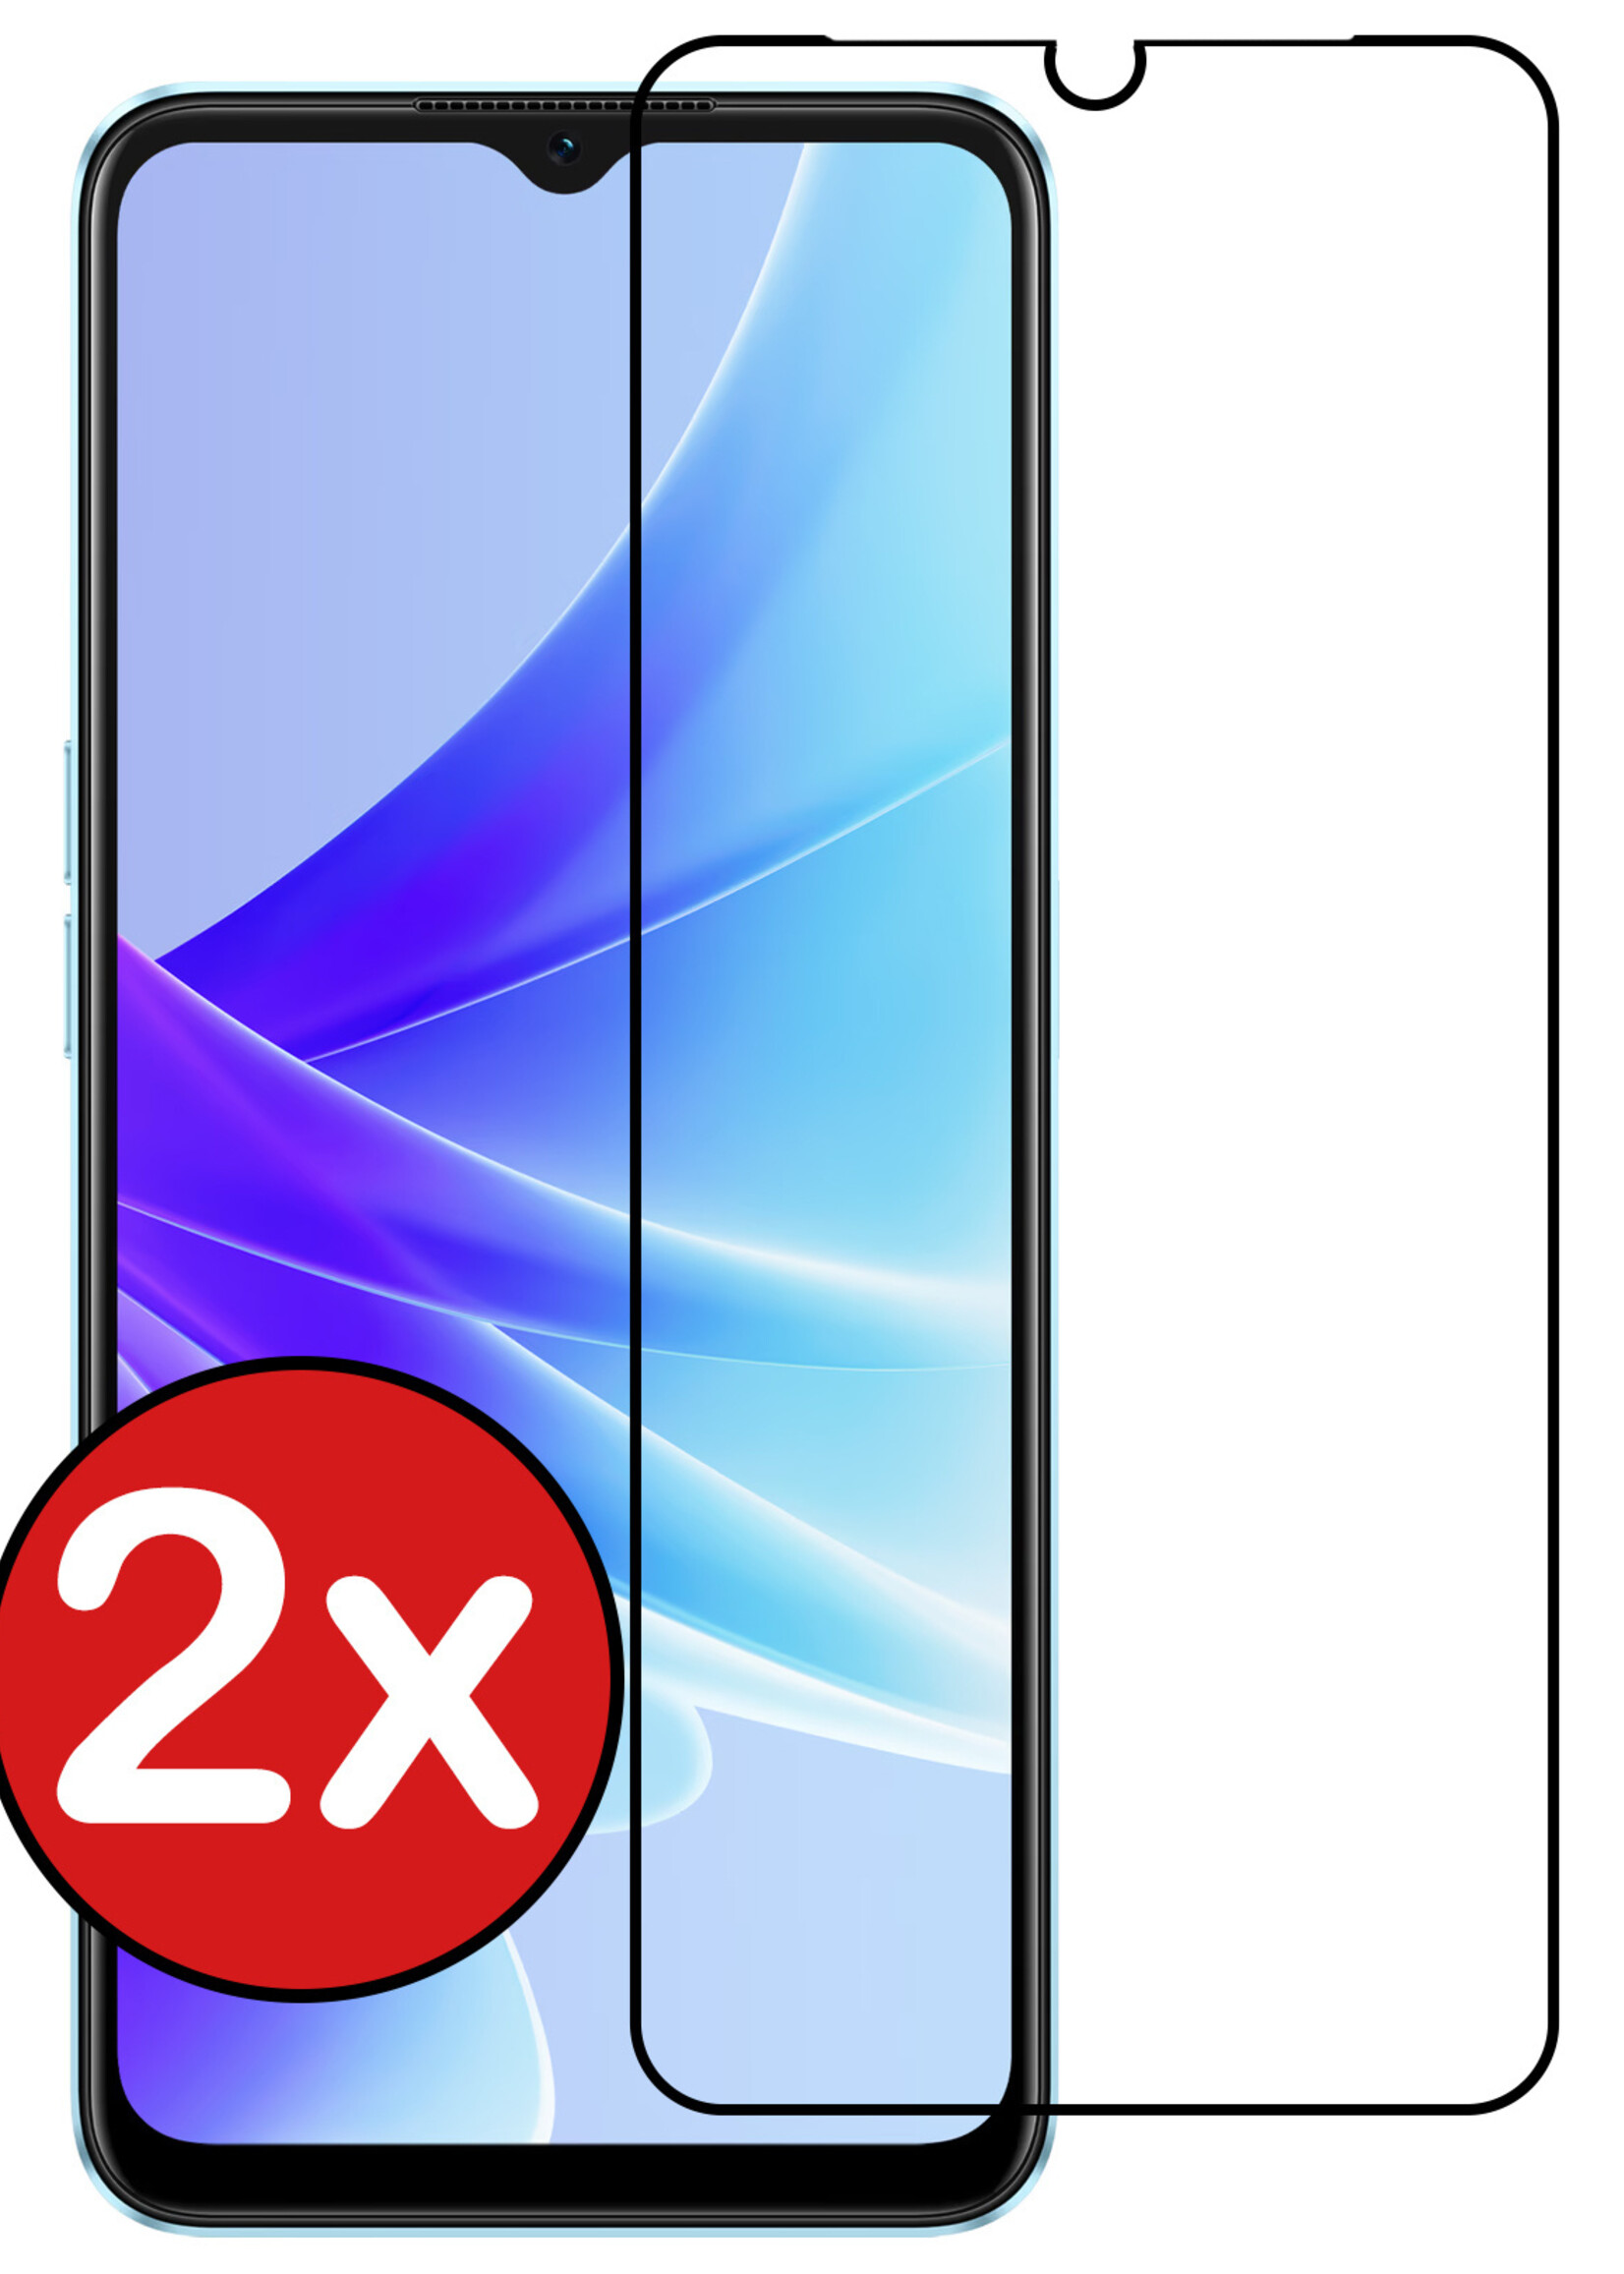 BTH Screenprotector Geschikt voor OPPO A17 Screenprotector Glas Gehard Tempered Glass Full Cover - Screenprotector Geschikt voor OPPO A17 Screen Protector Screen Cover - 2 PACK